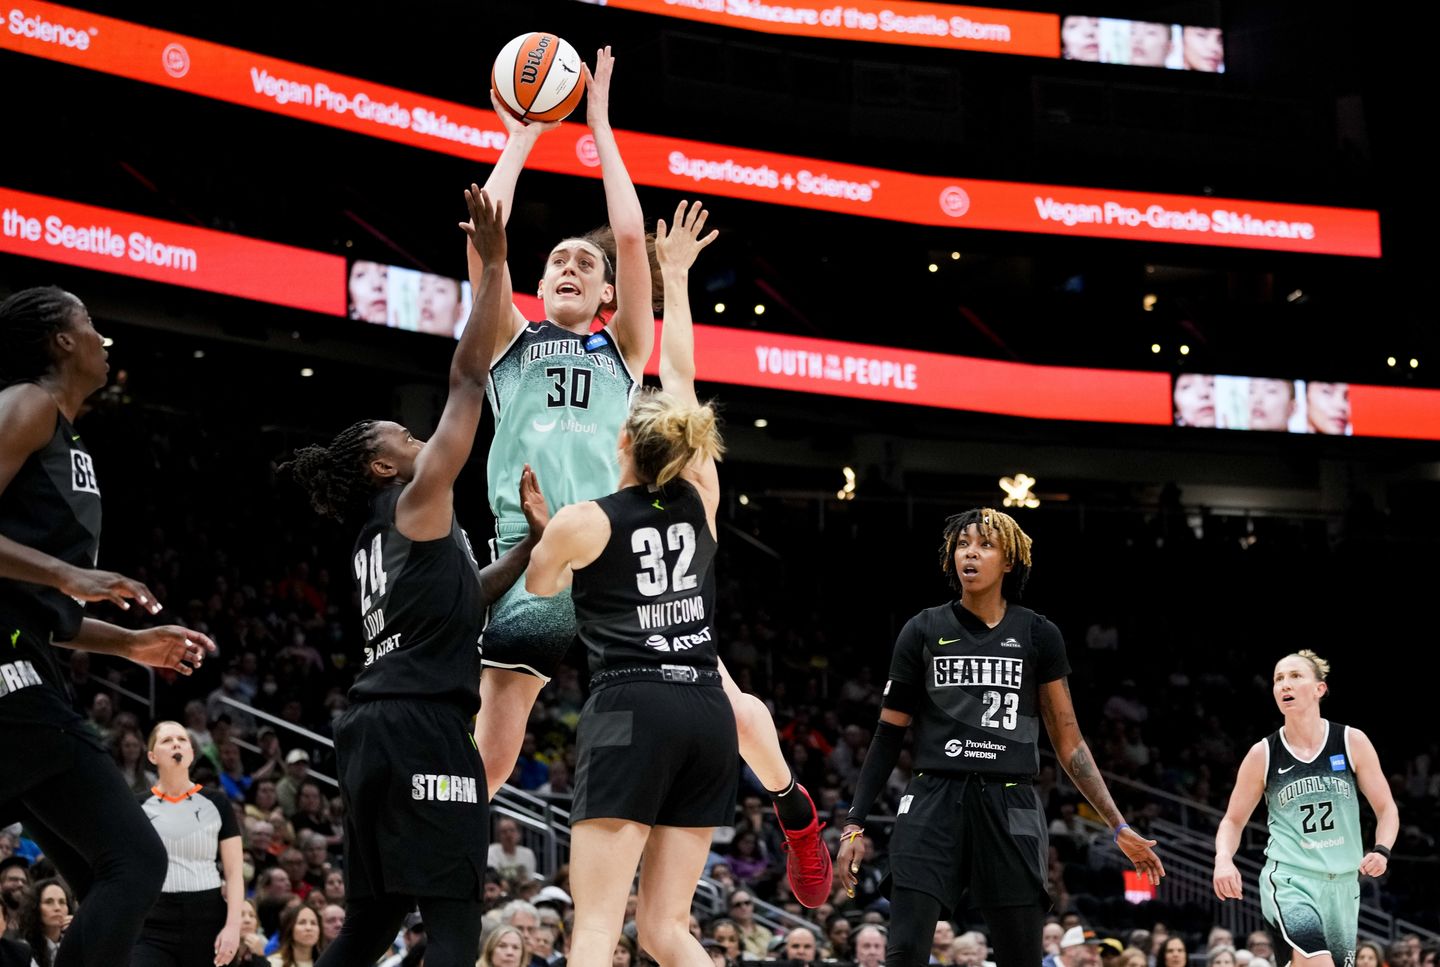 Breanna Stewart edges Aja Wilson for AP WNBA Player of the Year honors by one vote